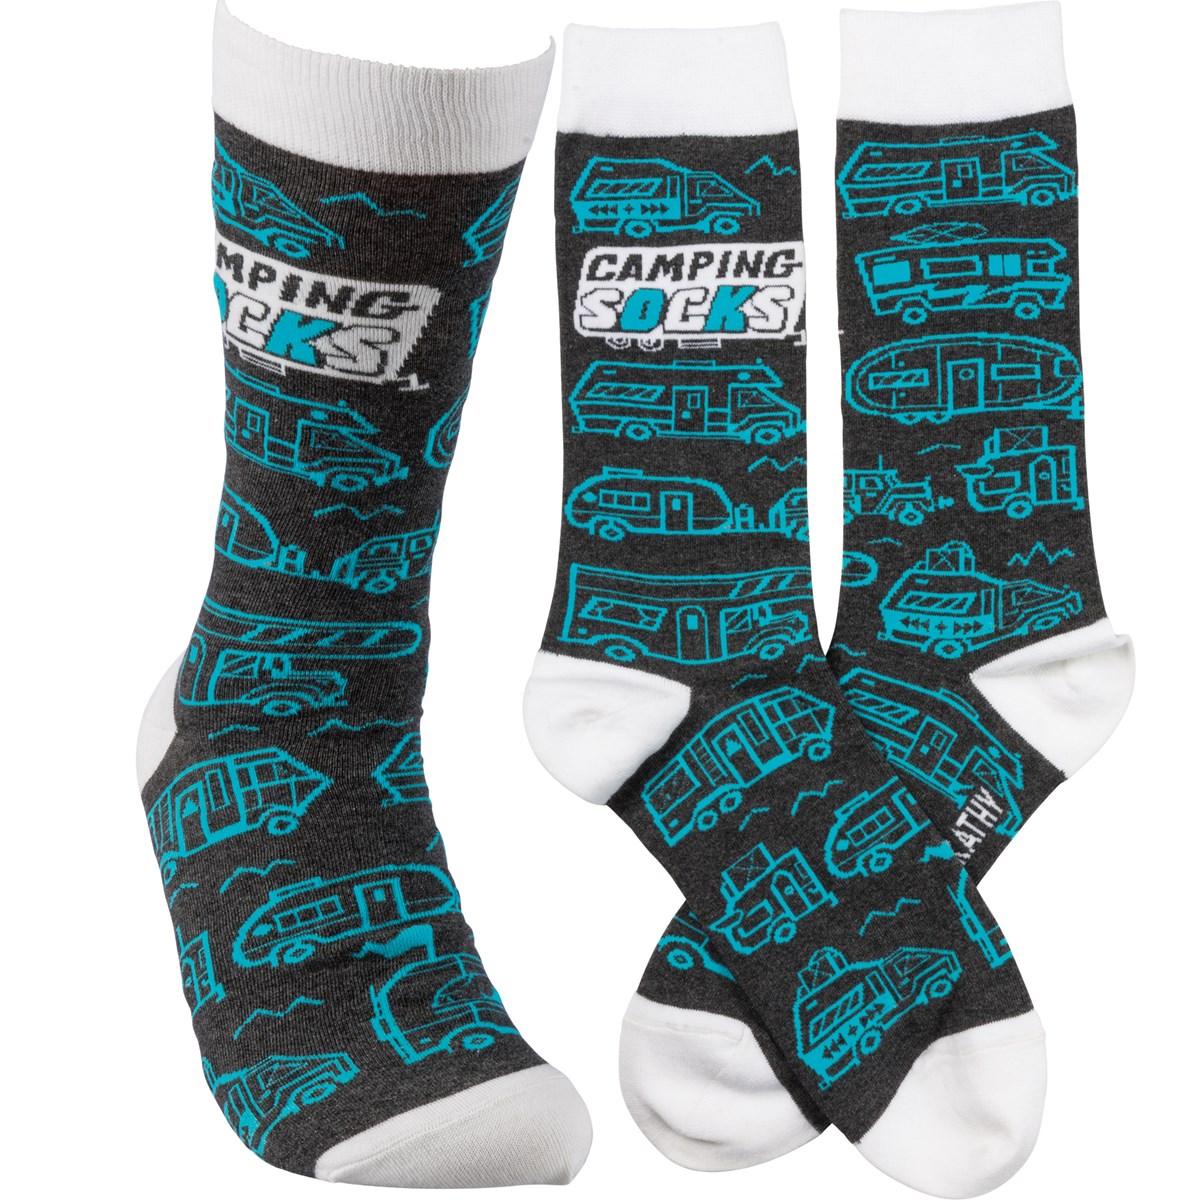 Sock blue and black with Campers